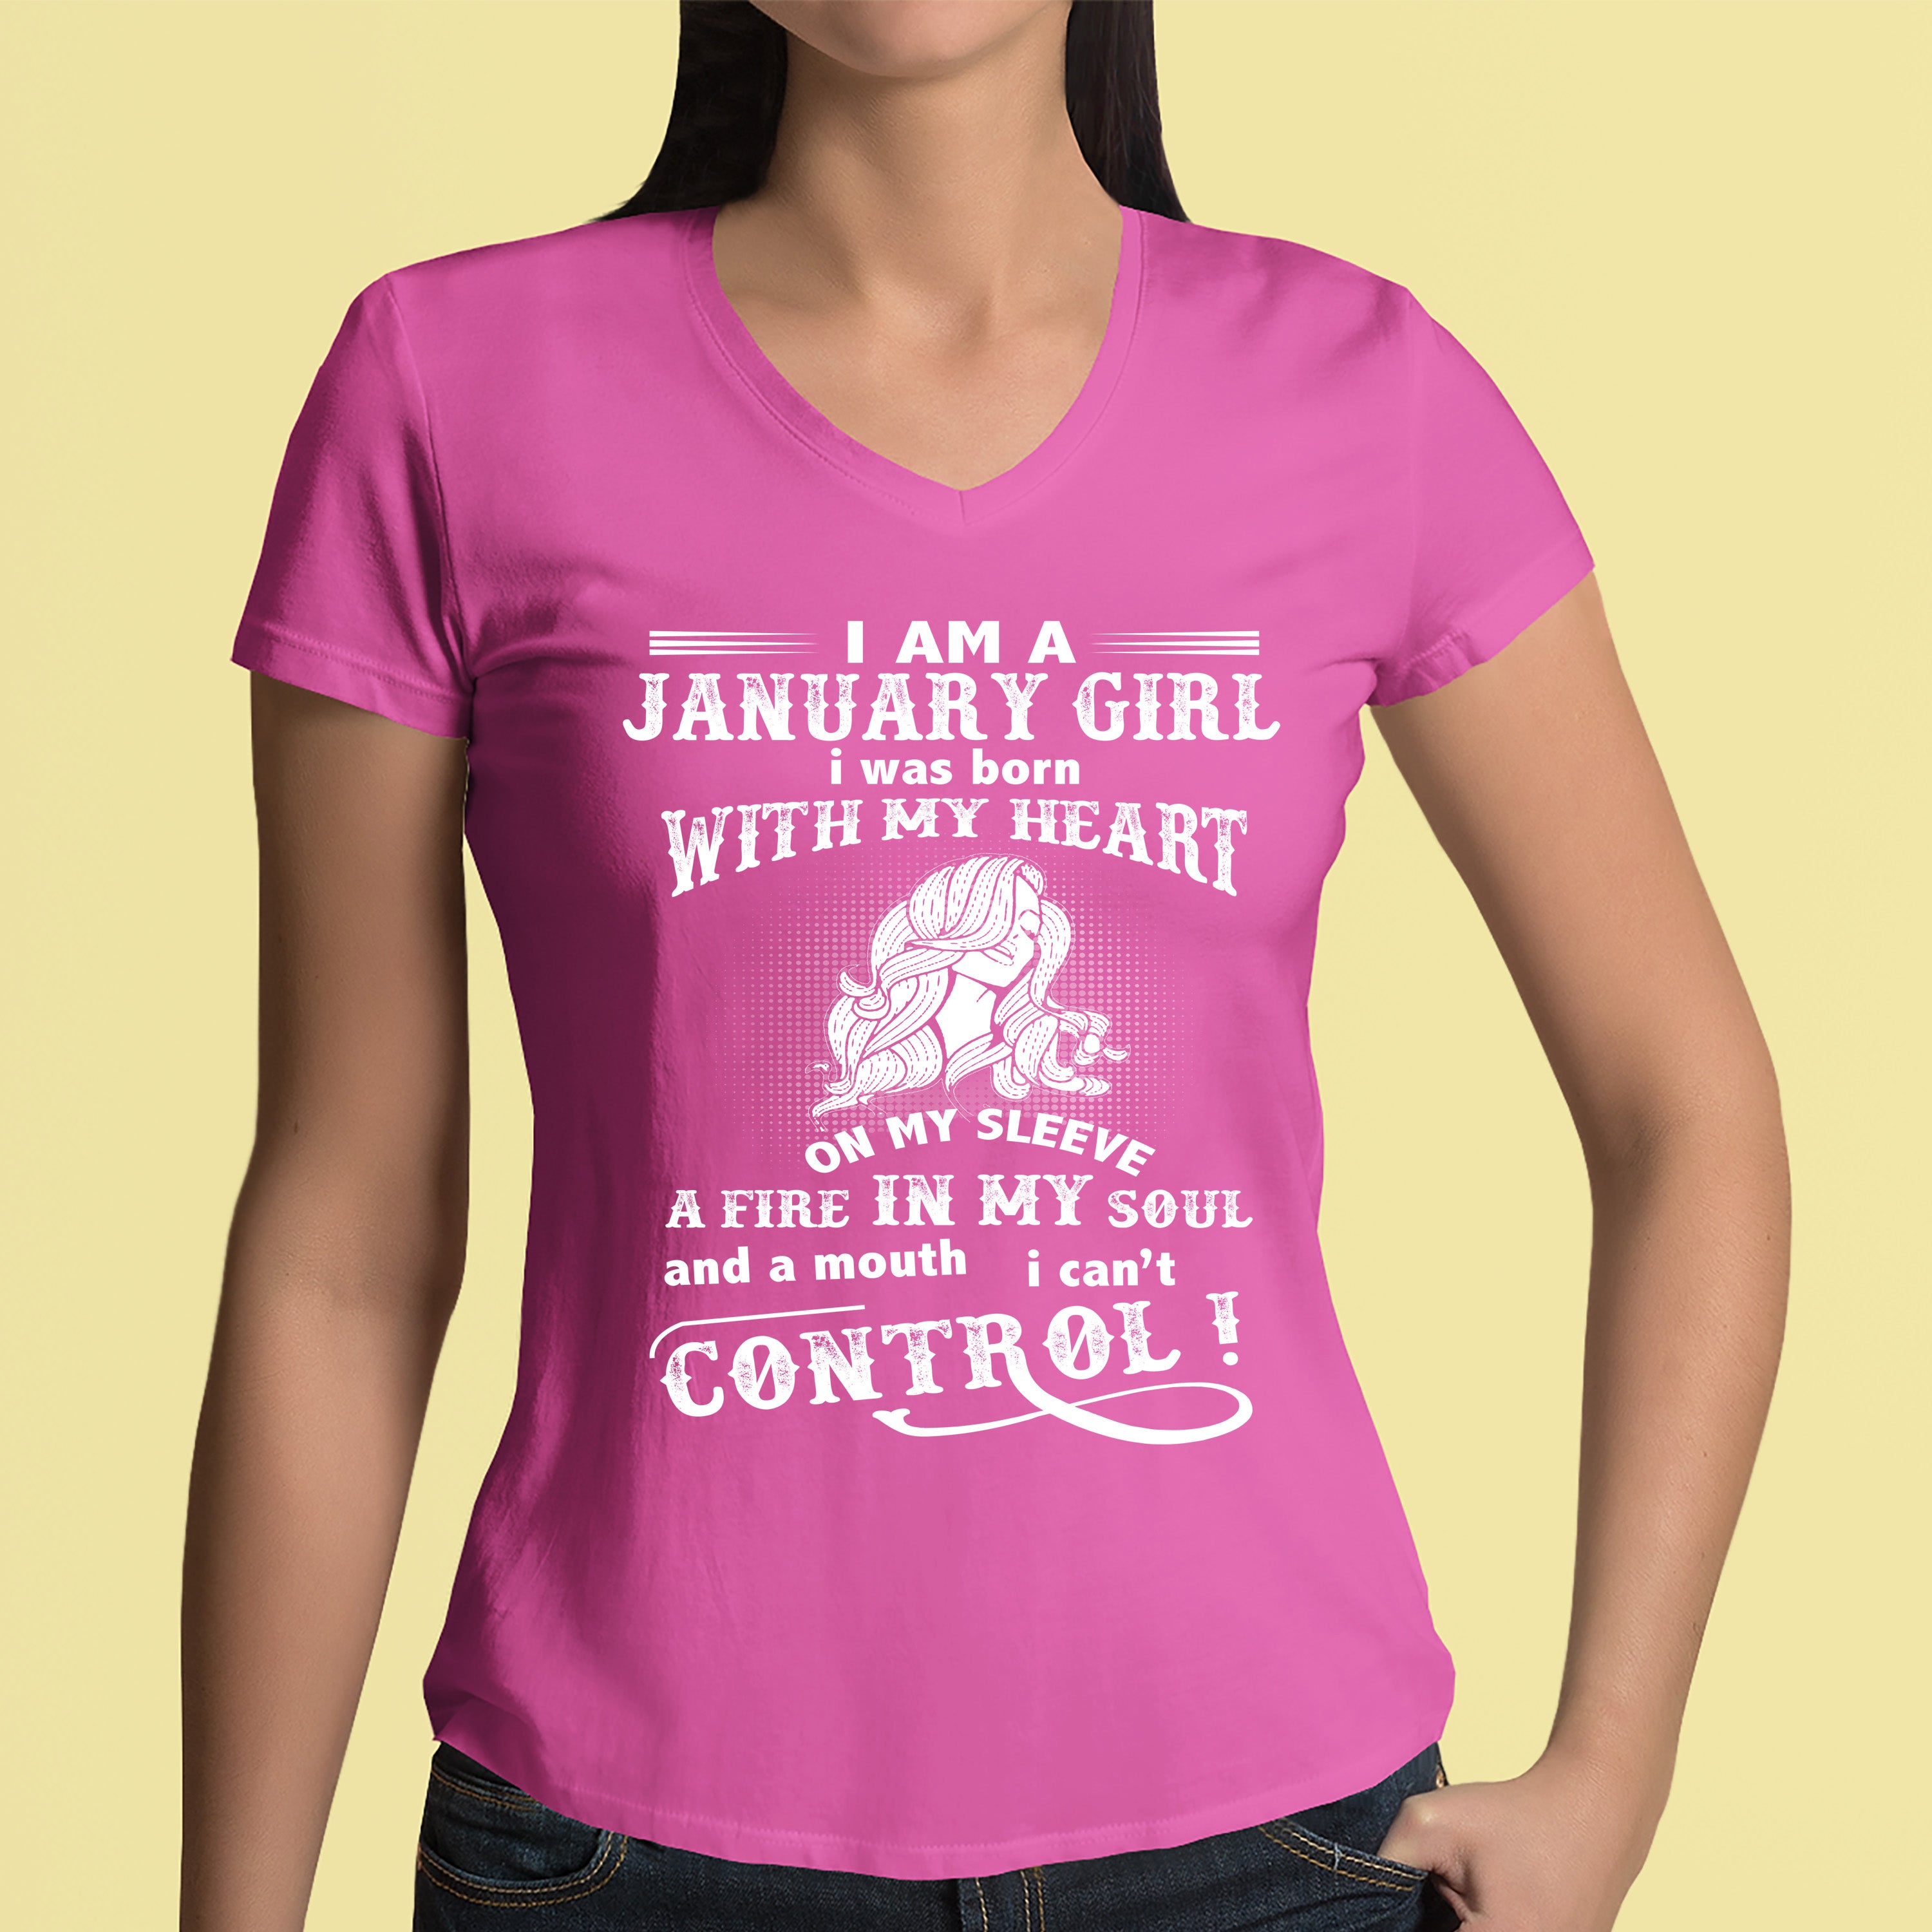 "A Fire In My Soul And A Mouth I Can't Control January Girl"" -Pink